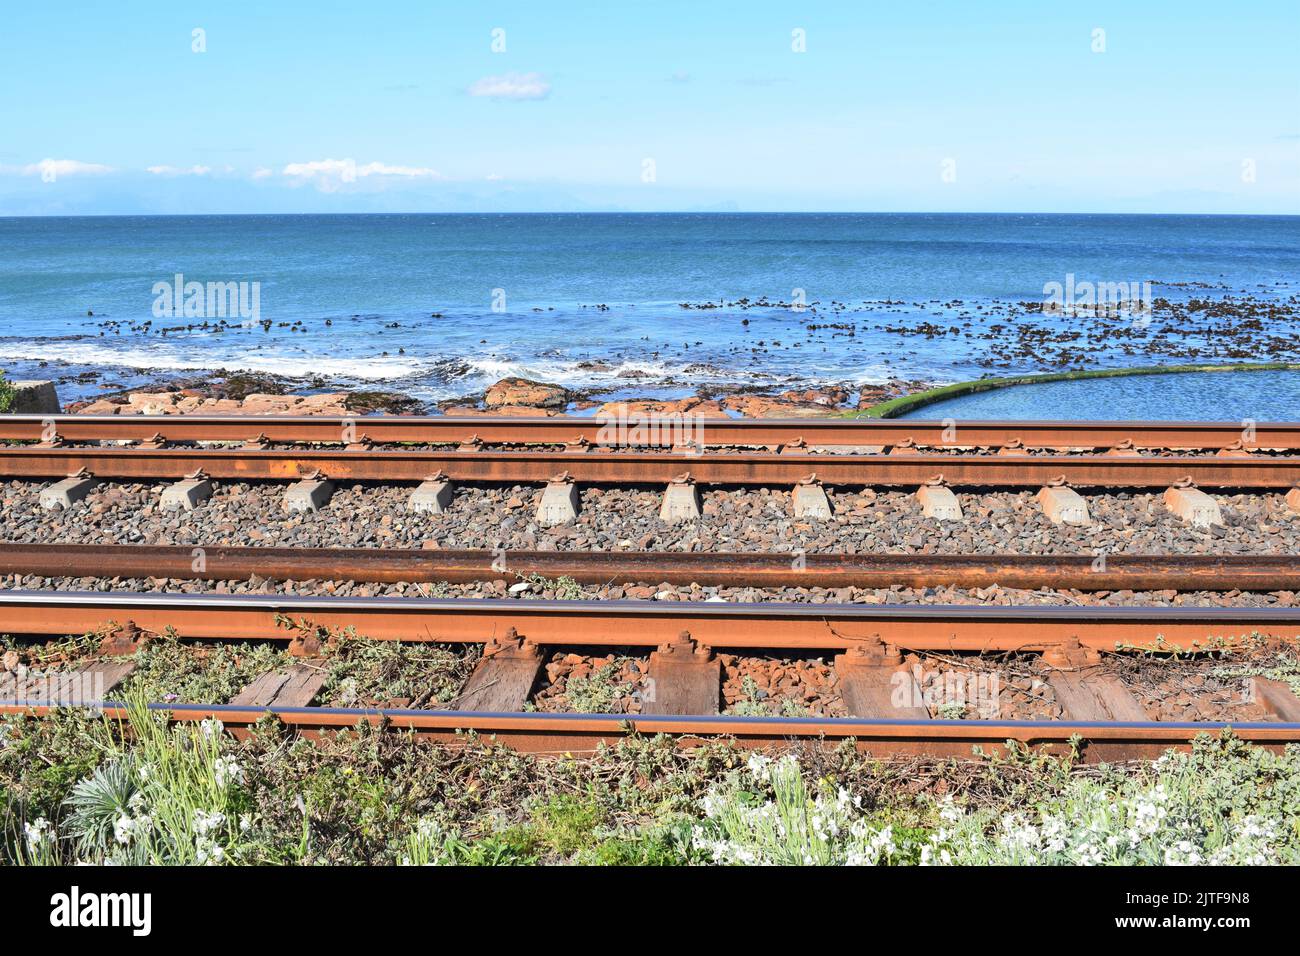 Land and sea meeting at the railway line, contrasting the rusty earthiness and the ocean blue. Stock Photo